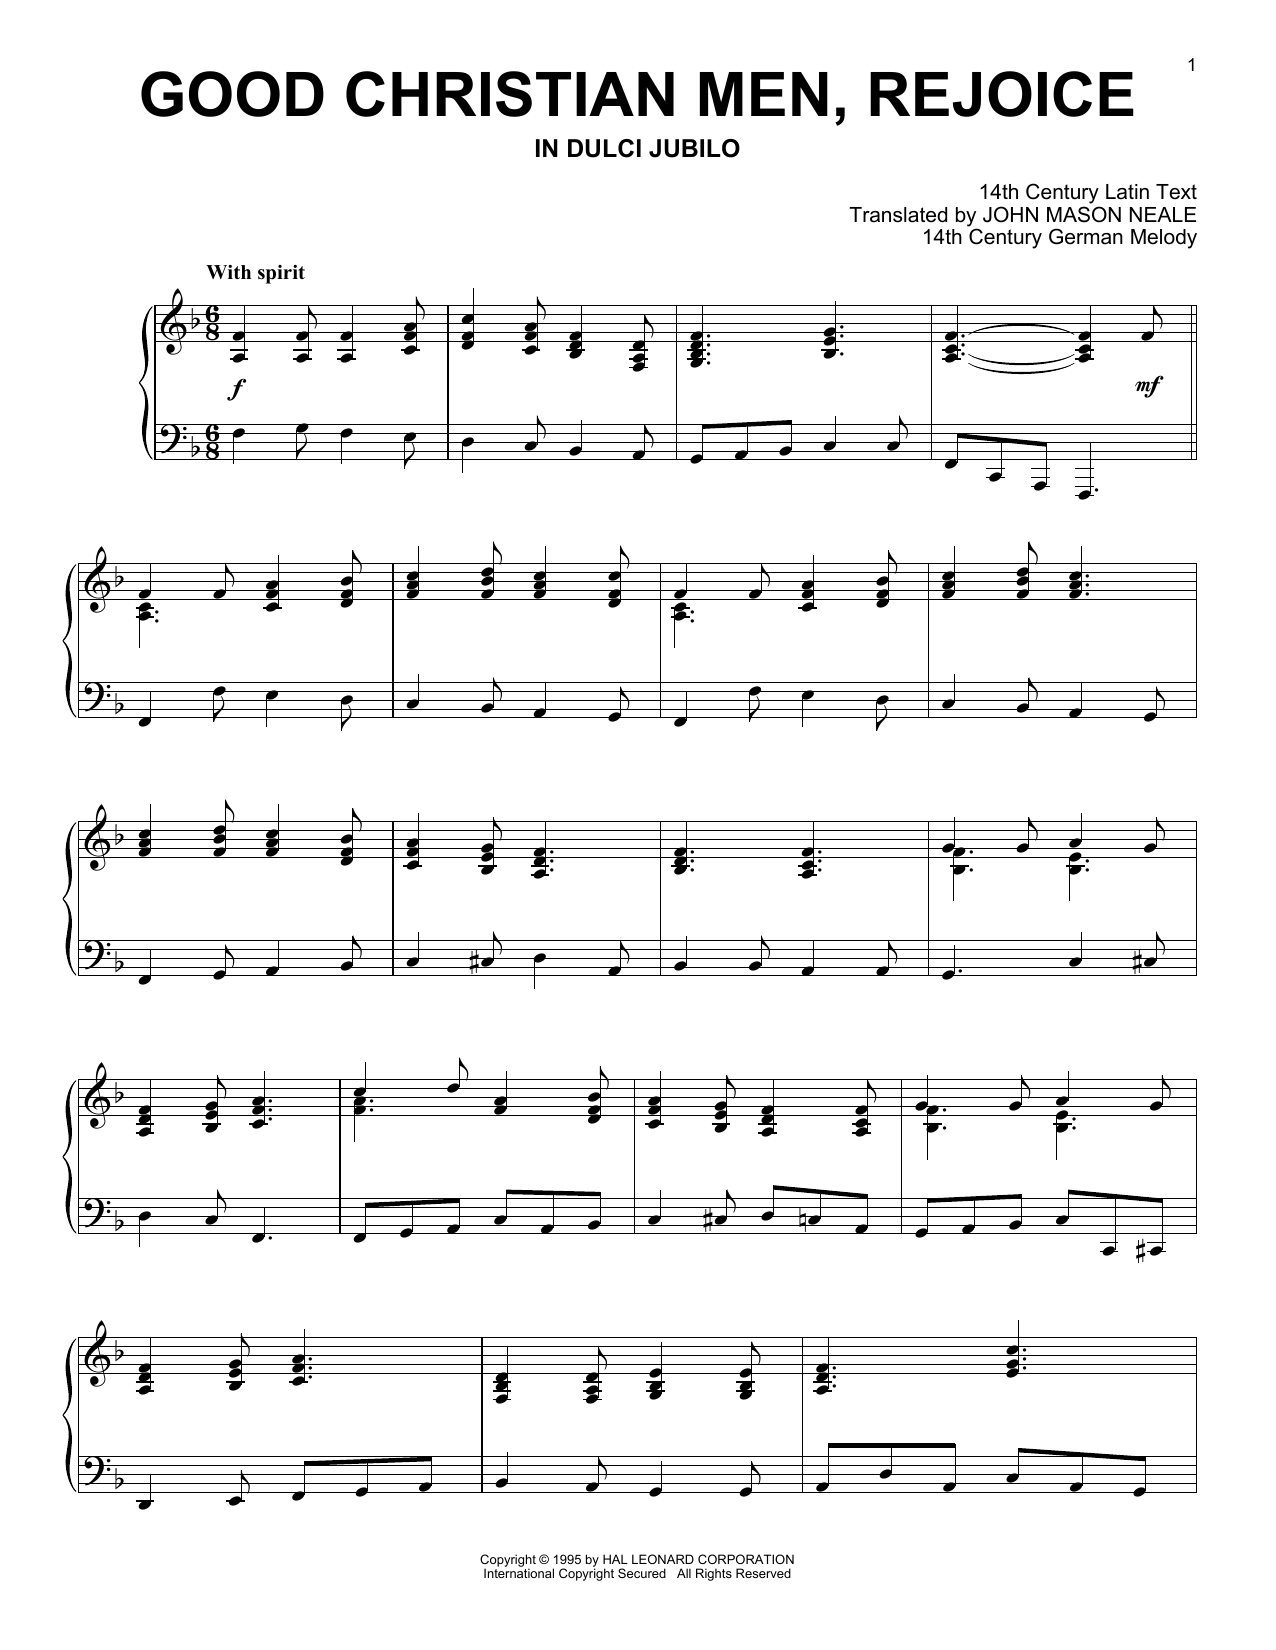 14th Century German Melody Good Christian Men, Rejoice sheet music notes and chords - Download Printable PDF and start playing in minutes.